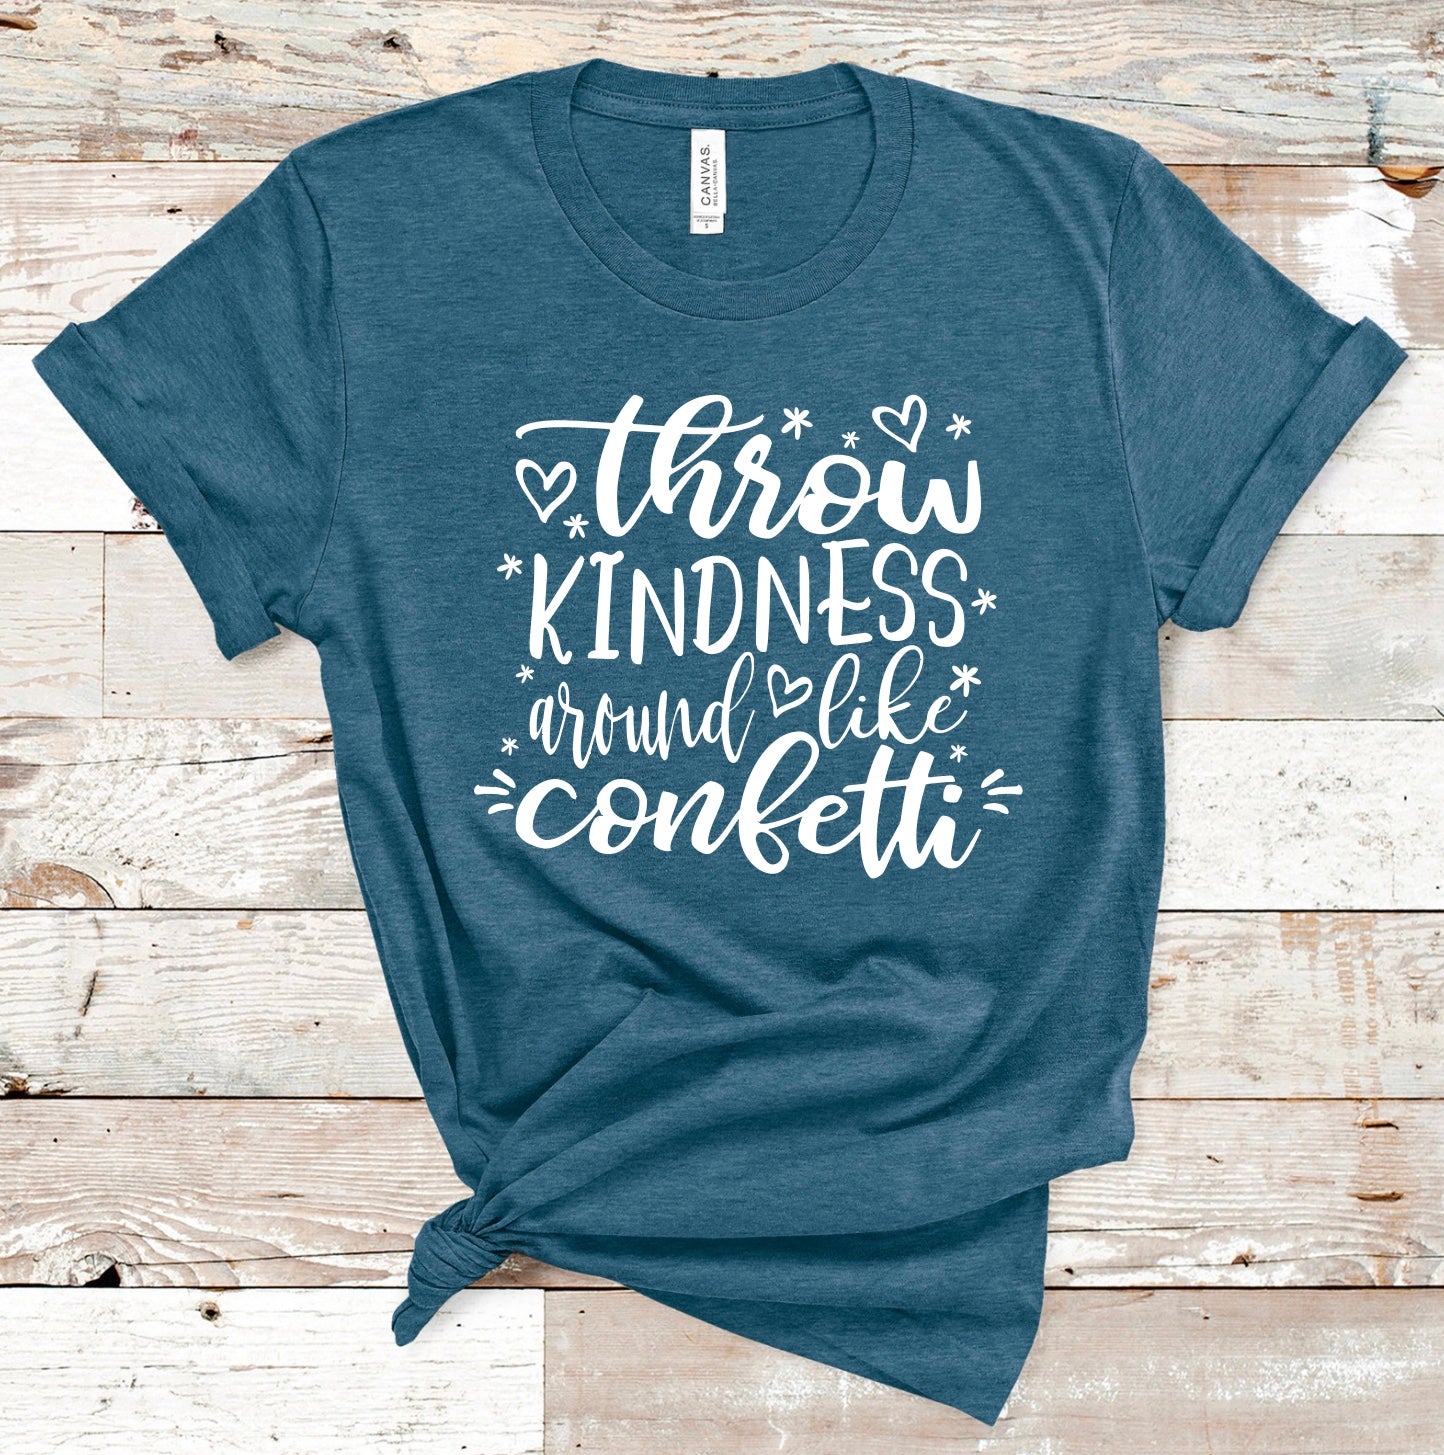 Discounted Item- Throw Kindness Around Like Confetti- XS t-shirt